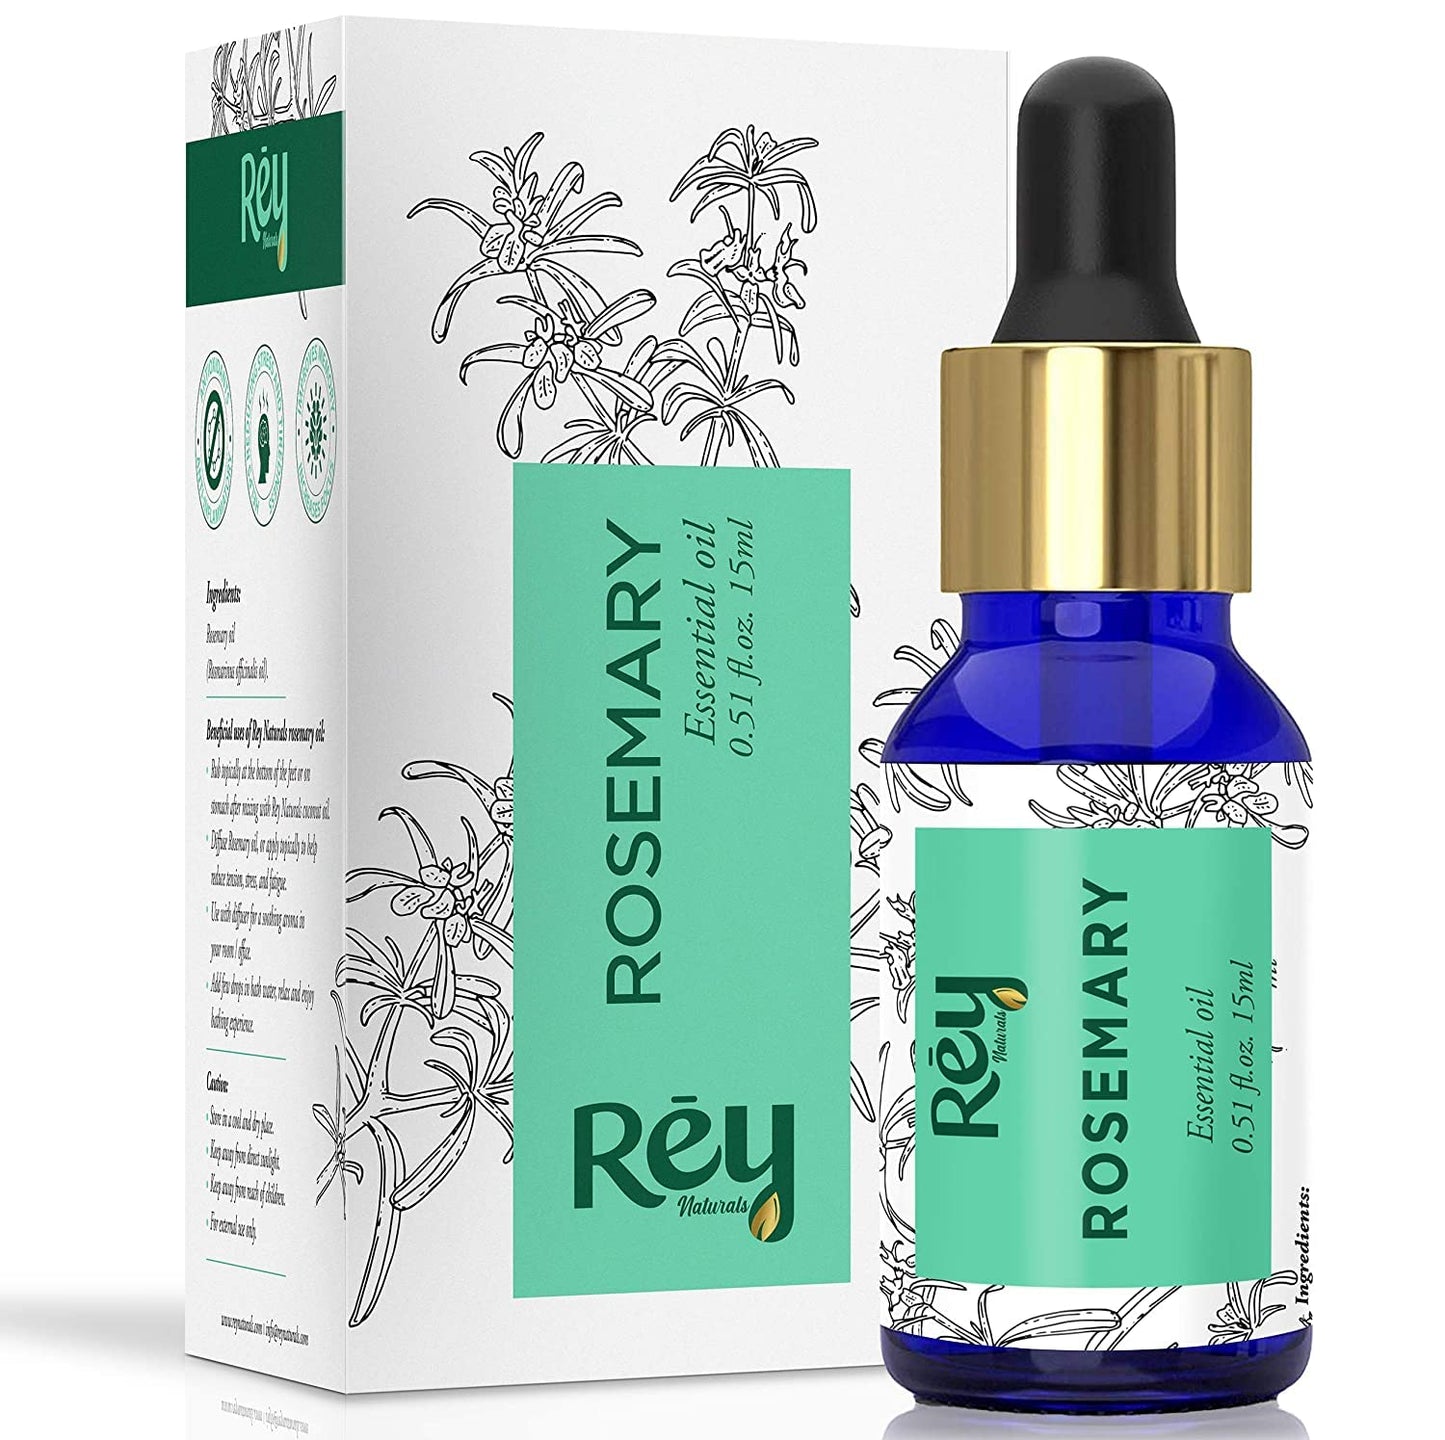 Rey Naturals Rosemary Essential Oil for Hair Growth 15 Ml and Onion Ginseng Hair Serum 100 Ml